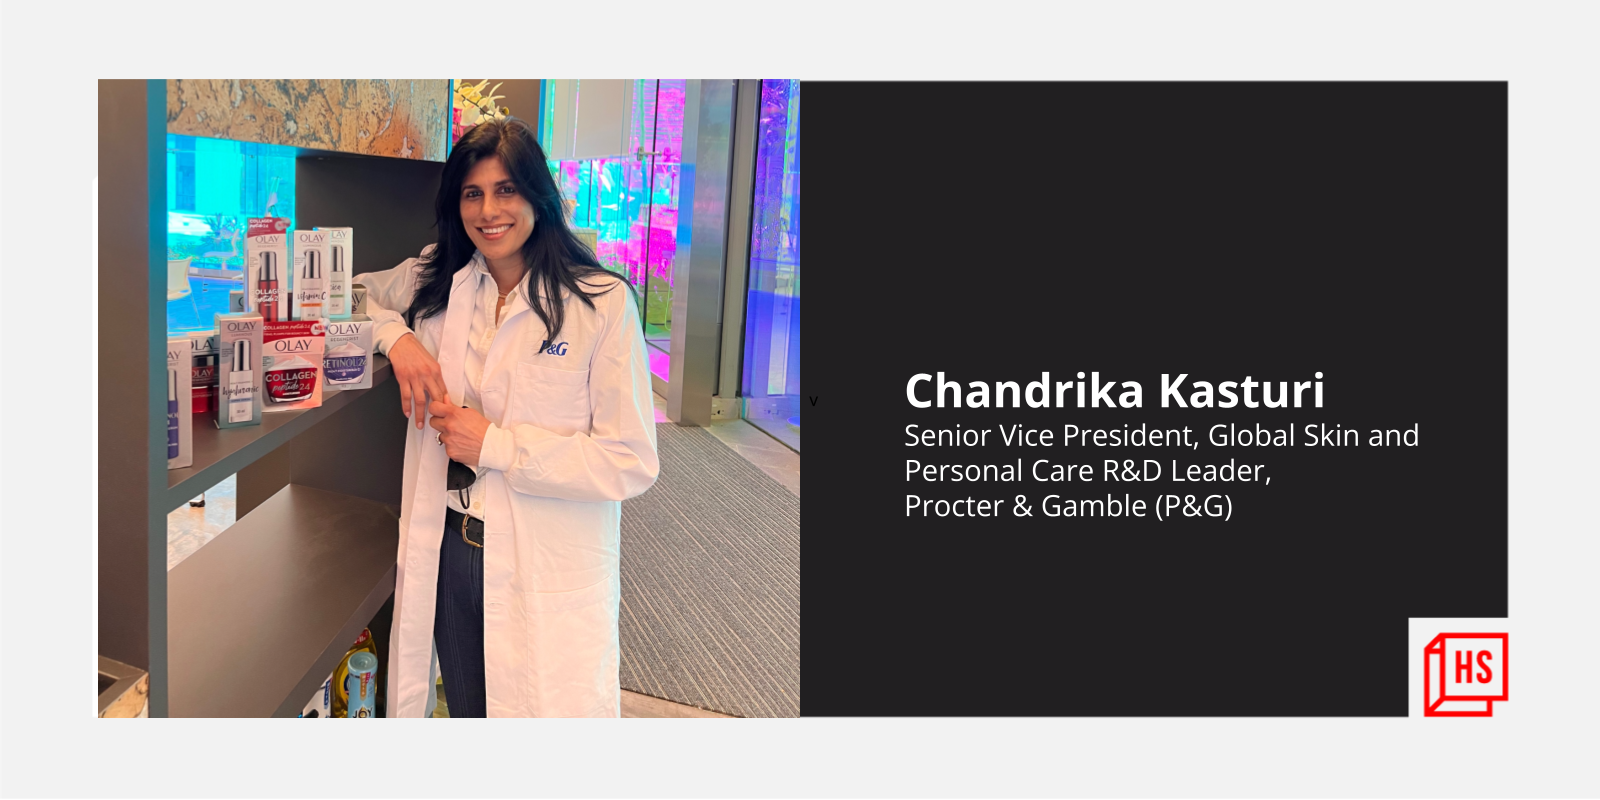 [Women in STEM] In a career spanning 29 years, how Chandrika Kasturi of P&G delivered breakthrough innovations in R&D